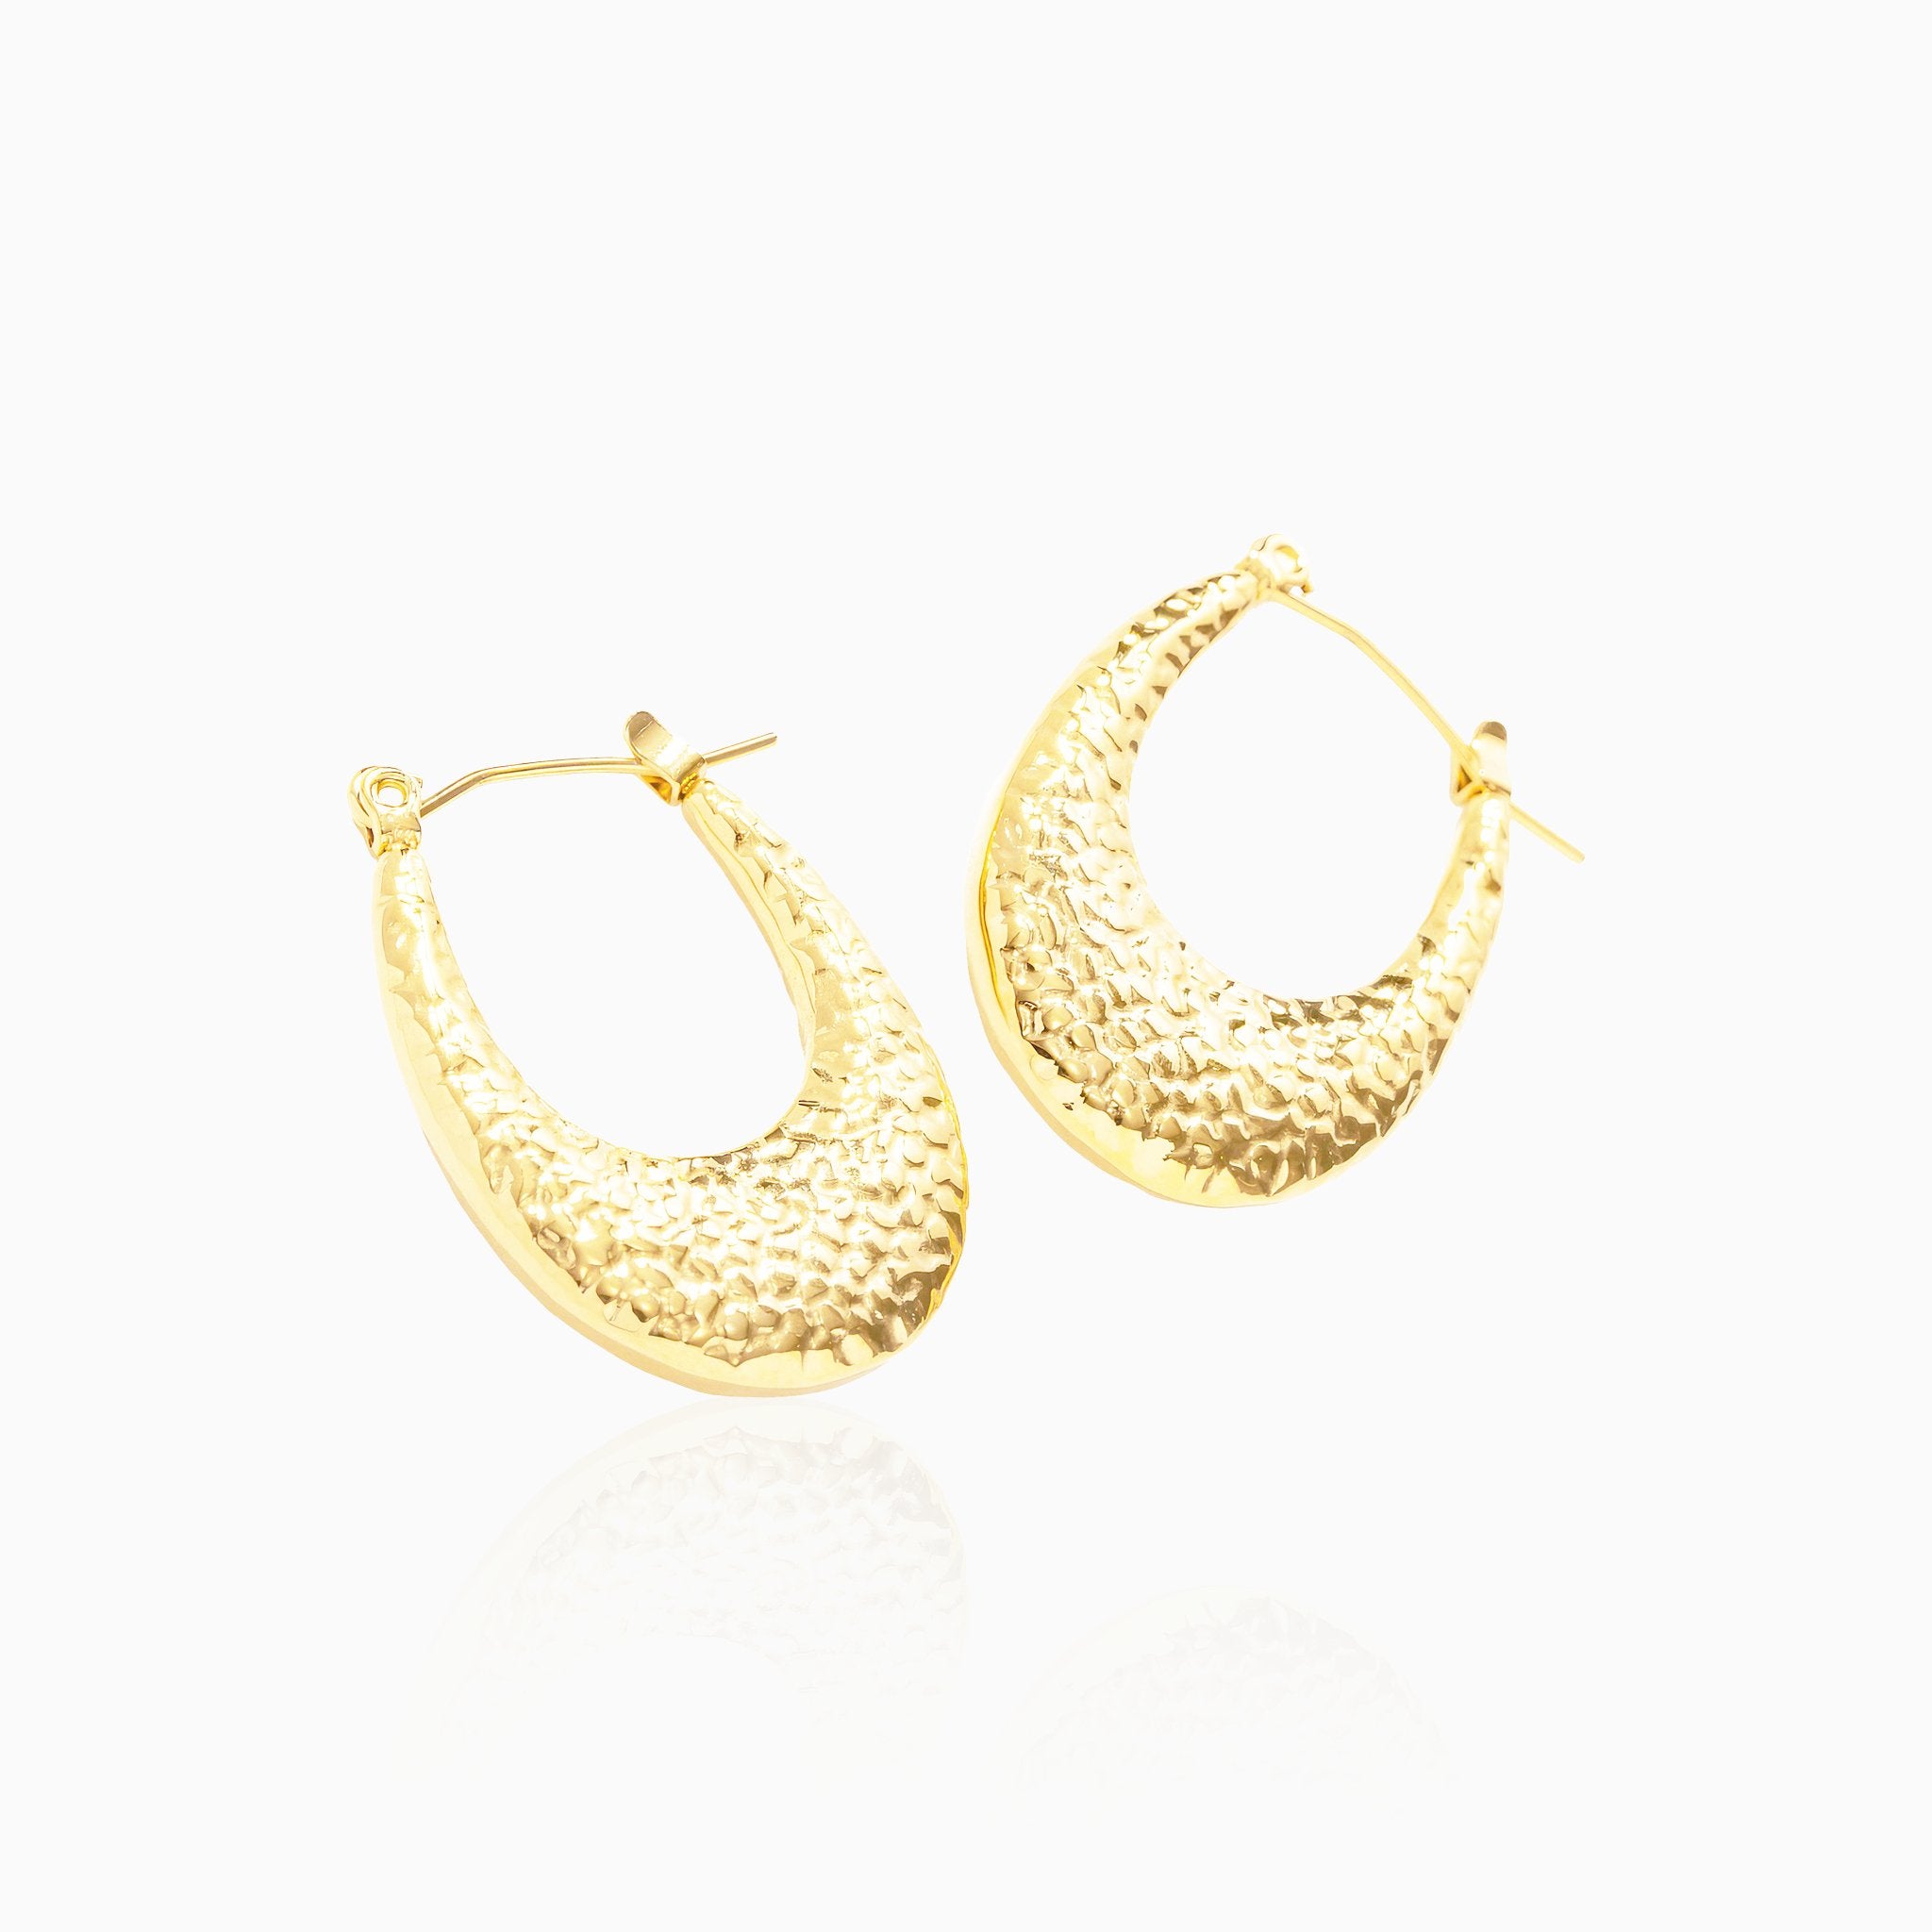 U-Shaped Earrings with Lava Pattern - Nobbier - Earrings - 18K Gold And Titanium PVD Coated Jewelry